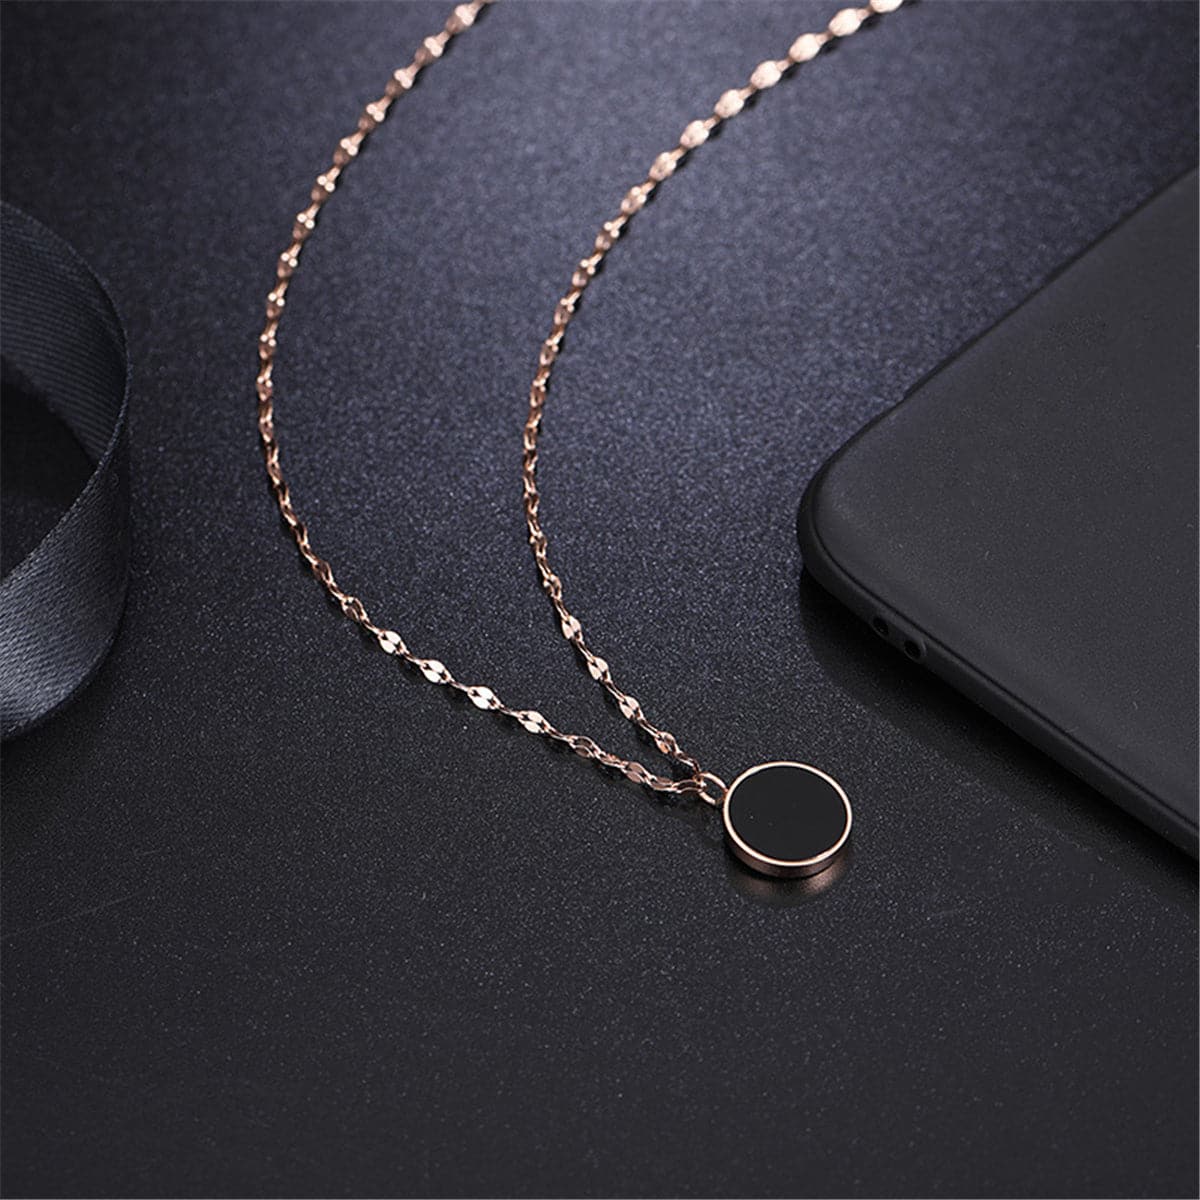 Black Shell & 18k Rose Gold-Plated Round Pendant Necklace - streetregion